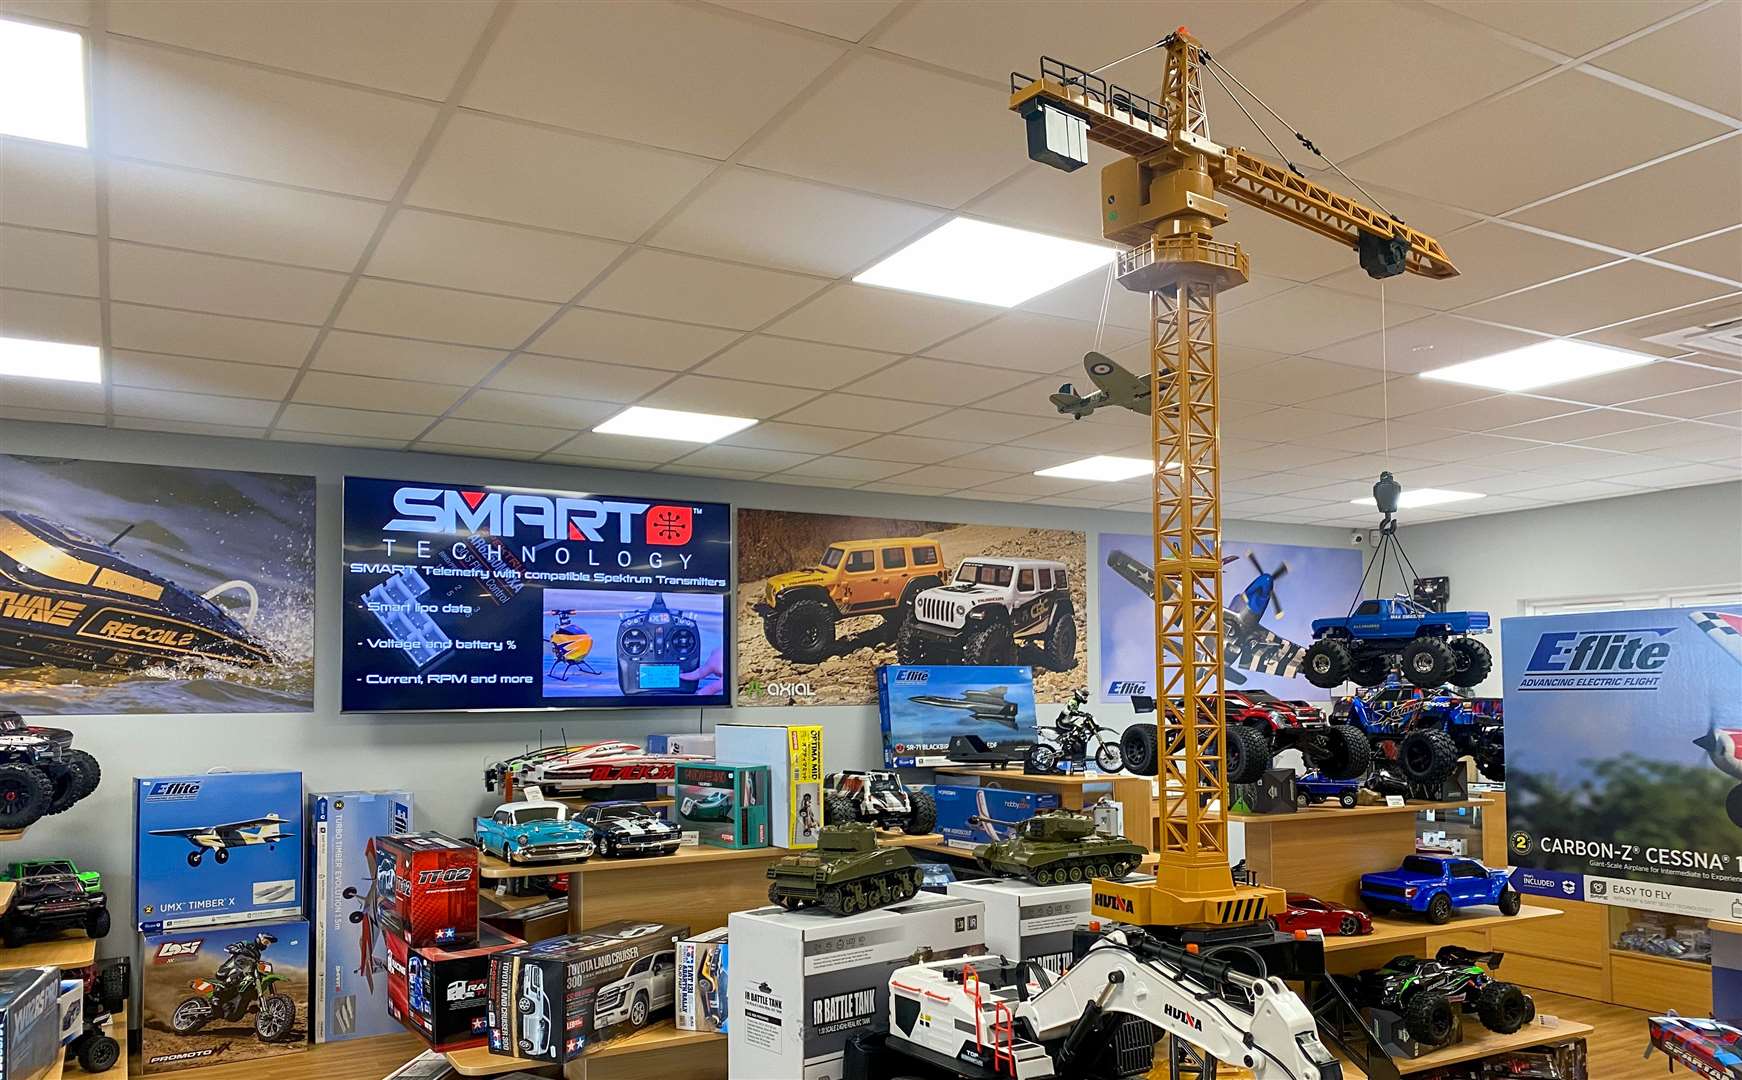 The shop is filled with models, remote control cars, posters and even a TV screen showing instructional videos